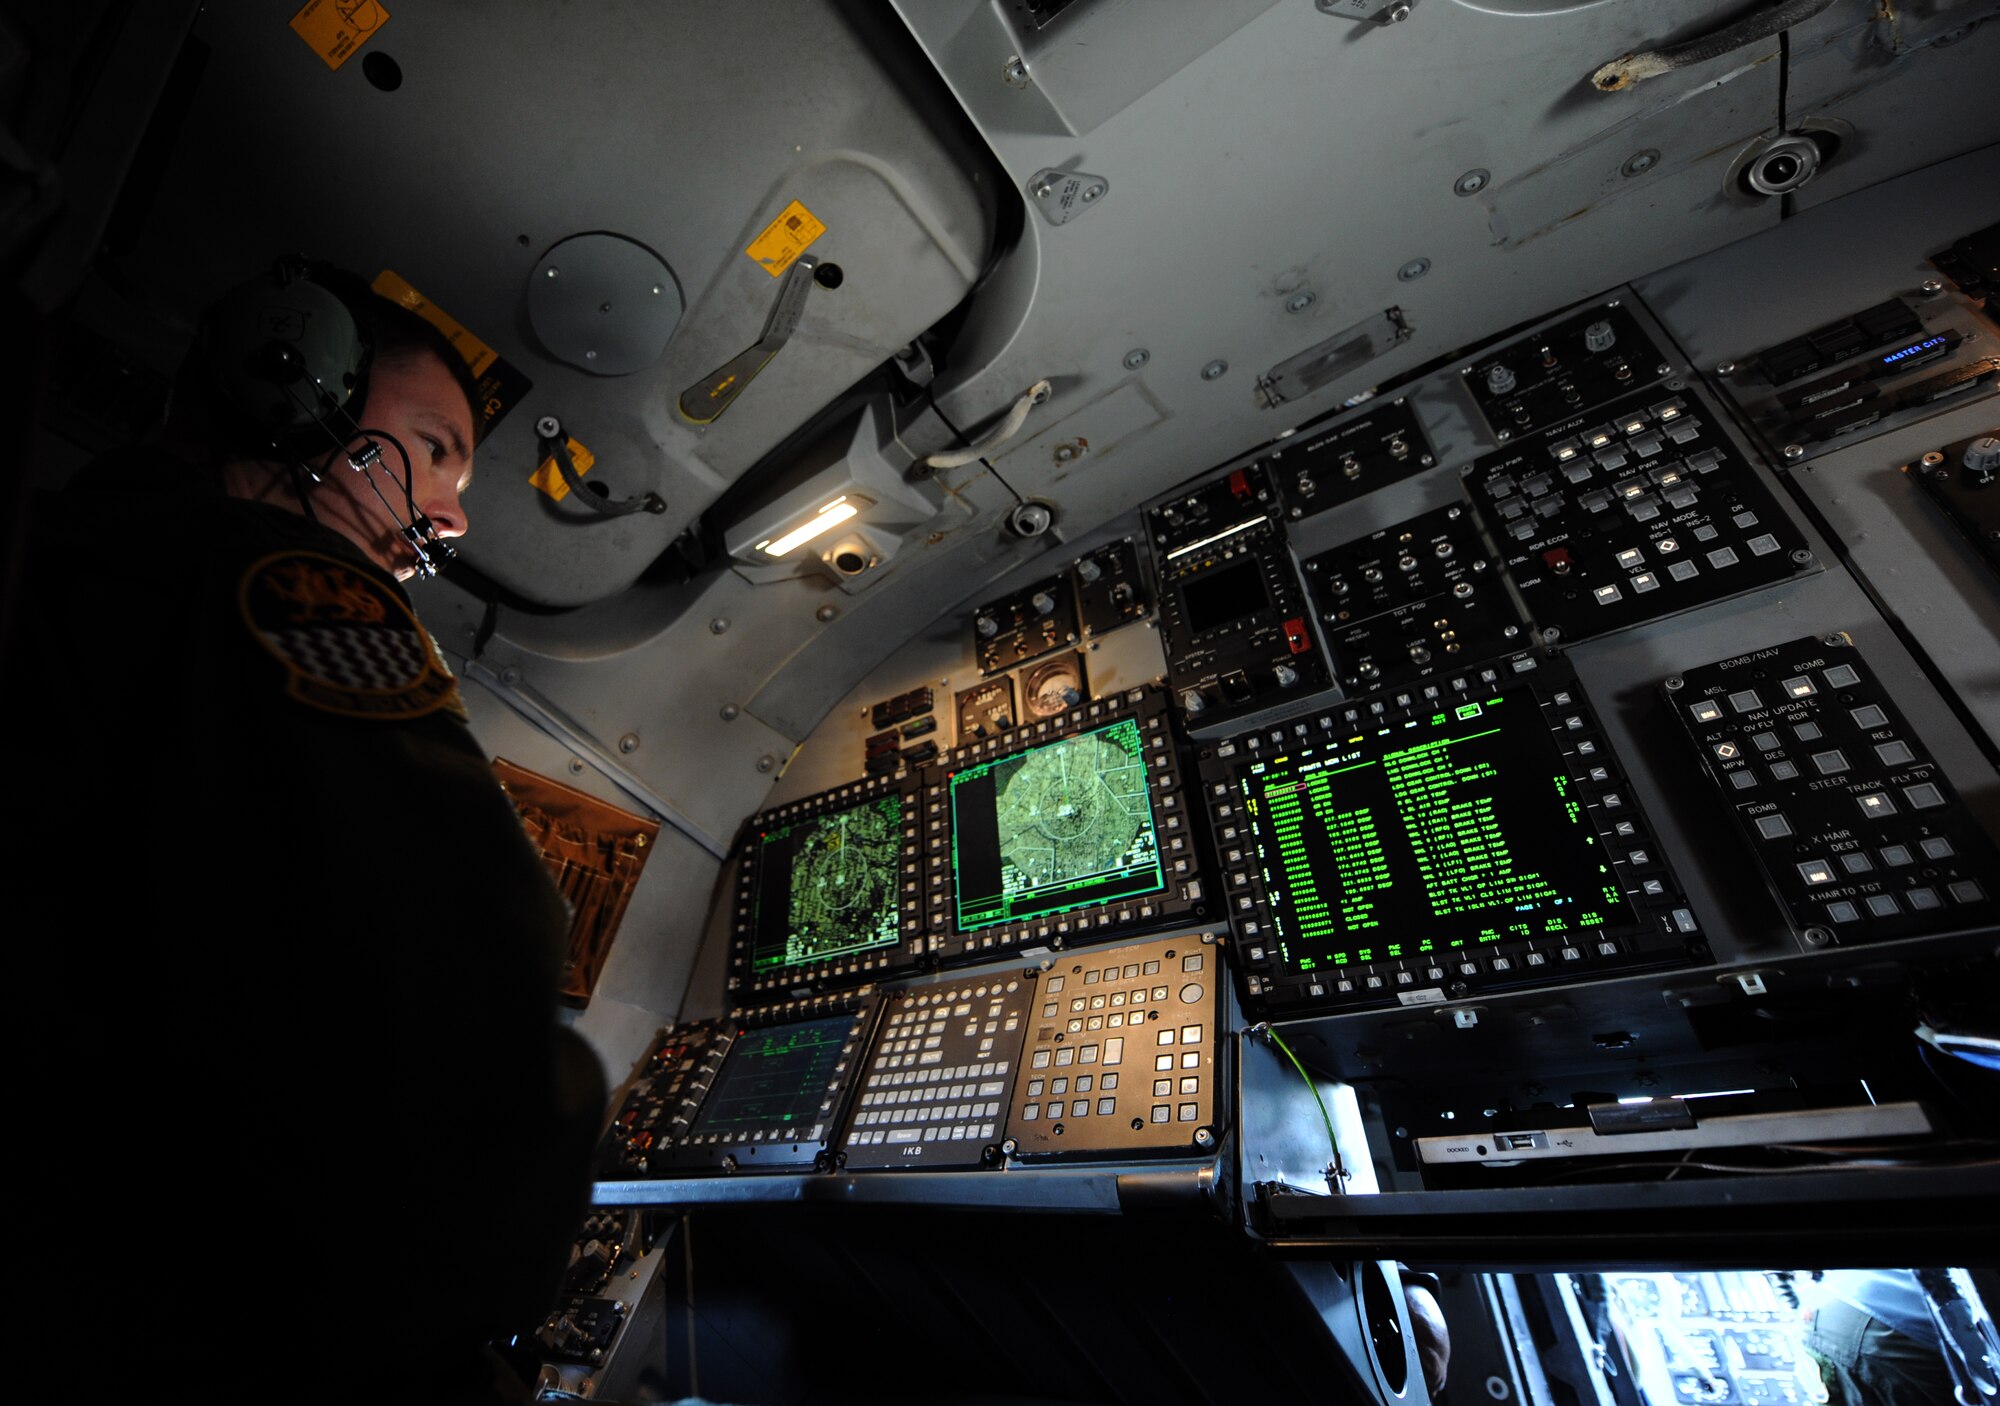 Maj. Brad Weber checks a screen that displays diagnostic information May 7, 2014, at Dyess Air Force Base, Texas. The IBS is a combination of three different upgrades, which includes a Fully Integrated Data Link, a Vertical Situation Display upgrade, and a Central Integrated System upgrade. The VSDU upgrades the B-1's forward cockpit by replacing two unsupportable, monochrome pilot and copilot displays with four multifunctional color displays, giving pilots more situational awareness data in a user-friendly format. Weber is a 337th Test and Evaluation Squadron, defensive weapons operator. (U.S. Air Force photo/Airman 1st Class Alexander Guerrero)